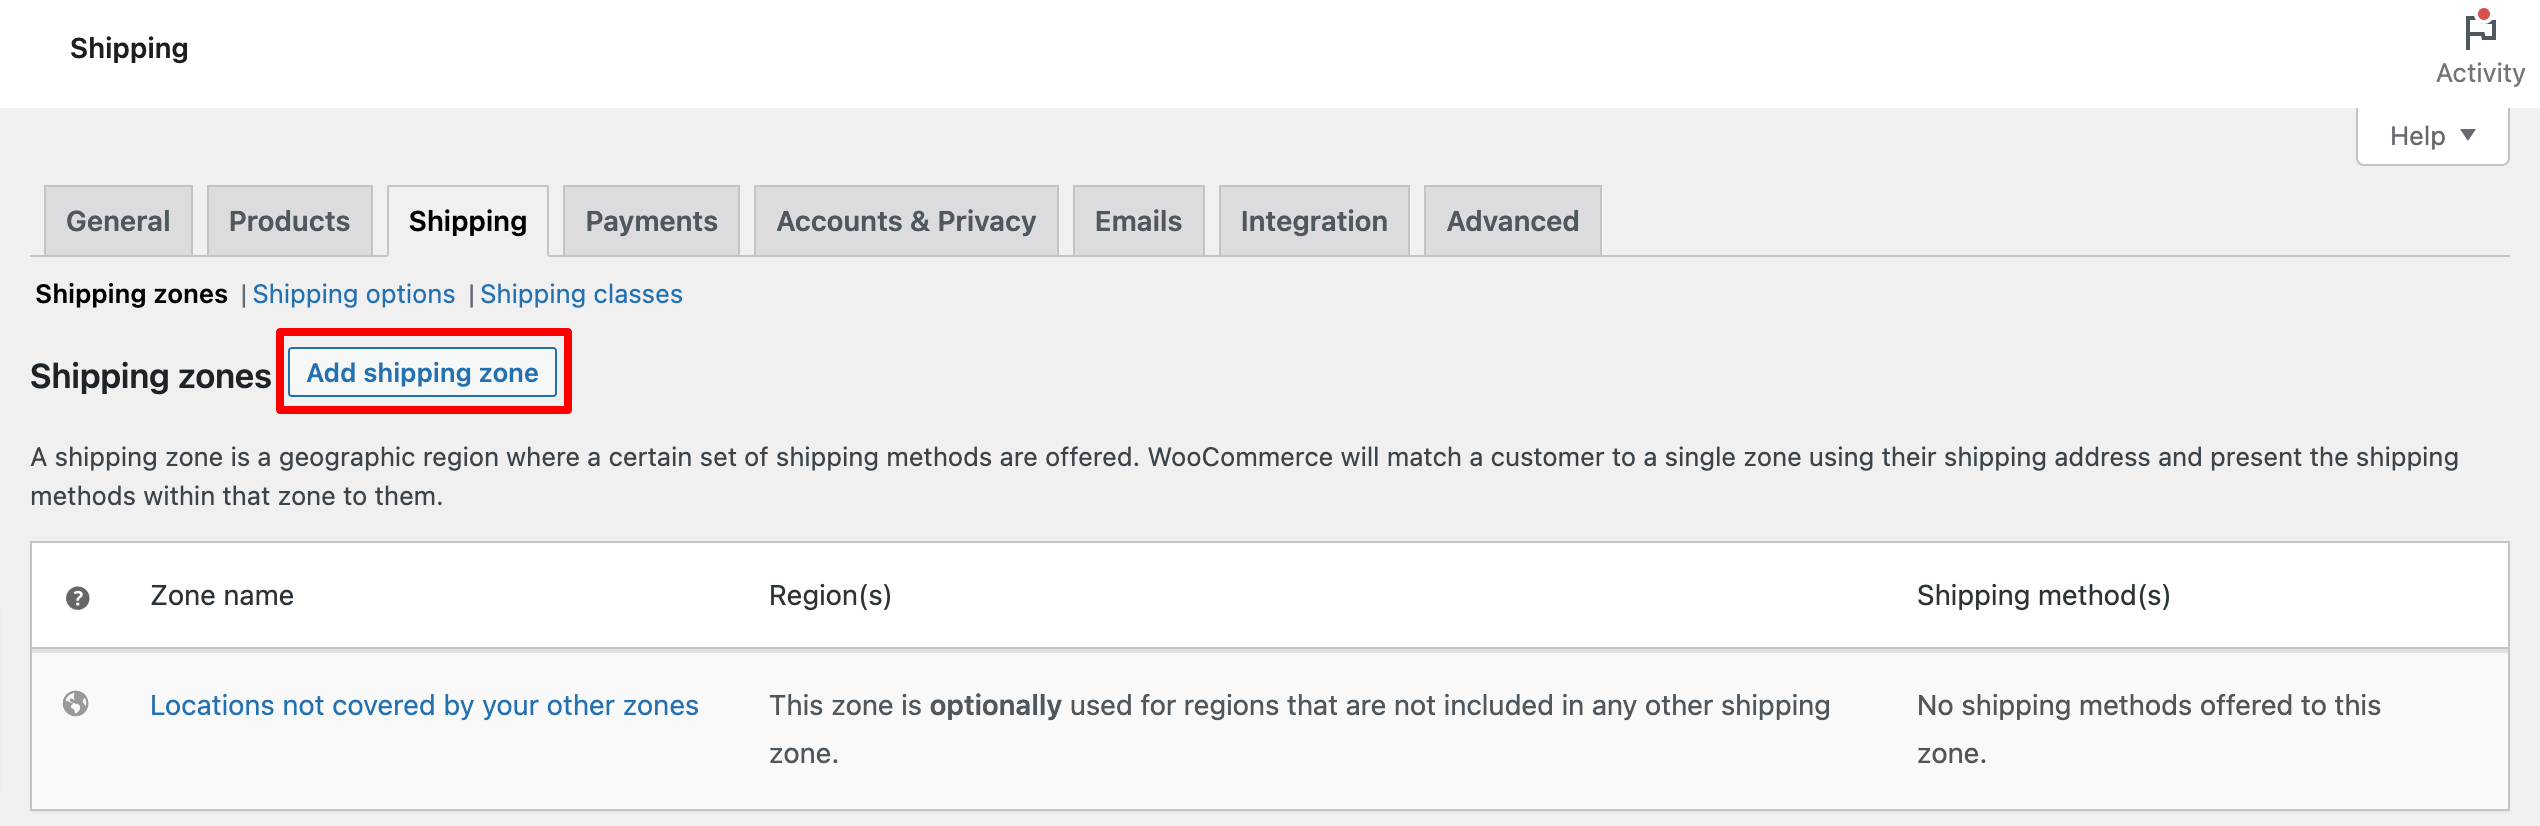 WooCommerce: Add Shipping Zone Button